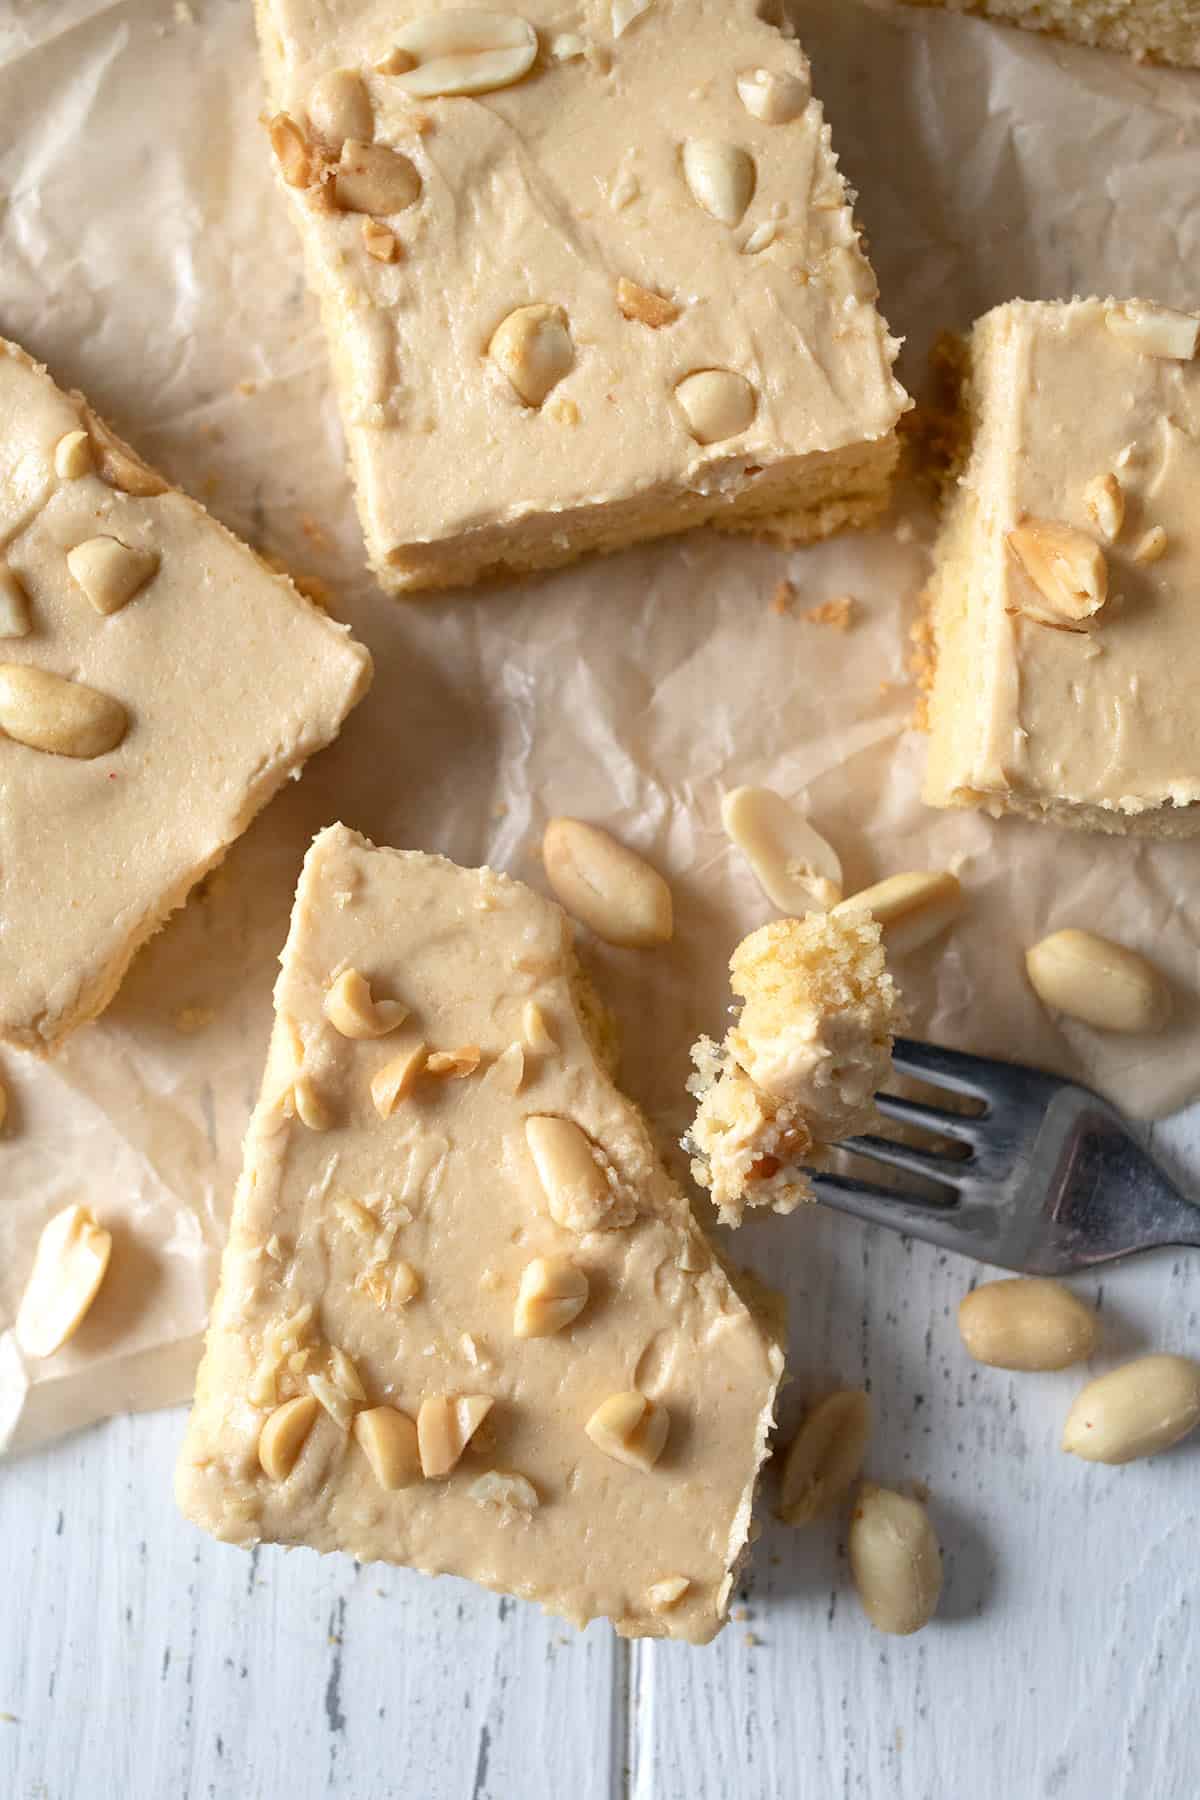 Top down image of pieces of Keto Peanut Butter Sheet Cake on crinkled brown paper.